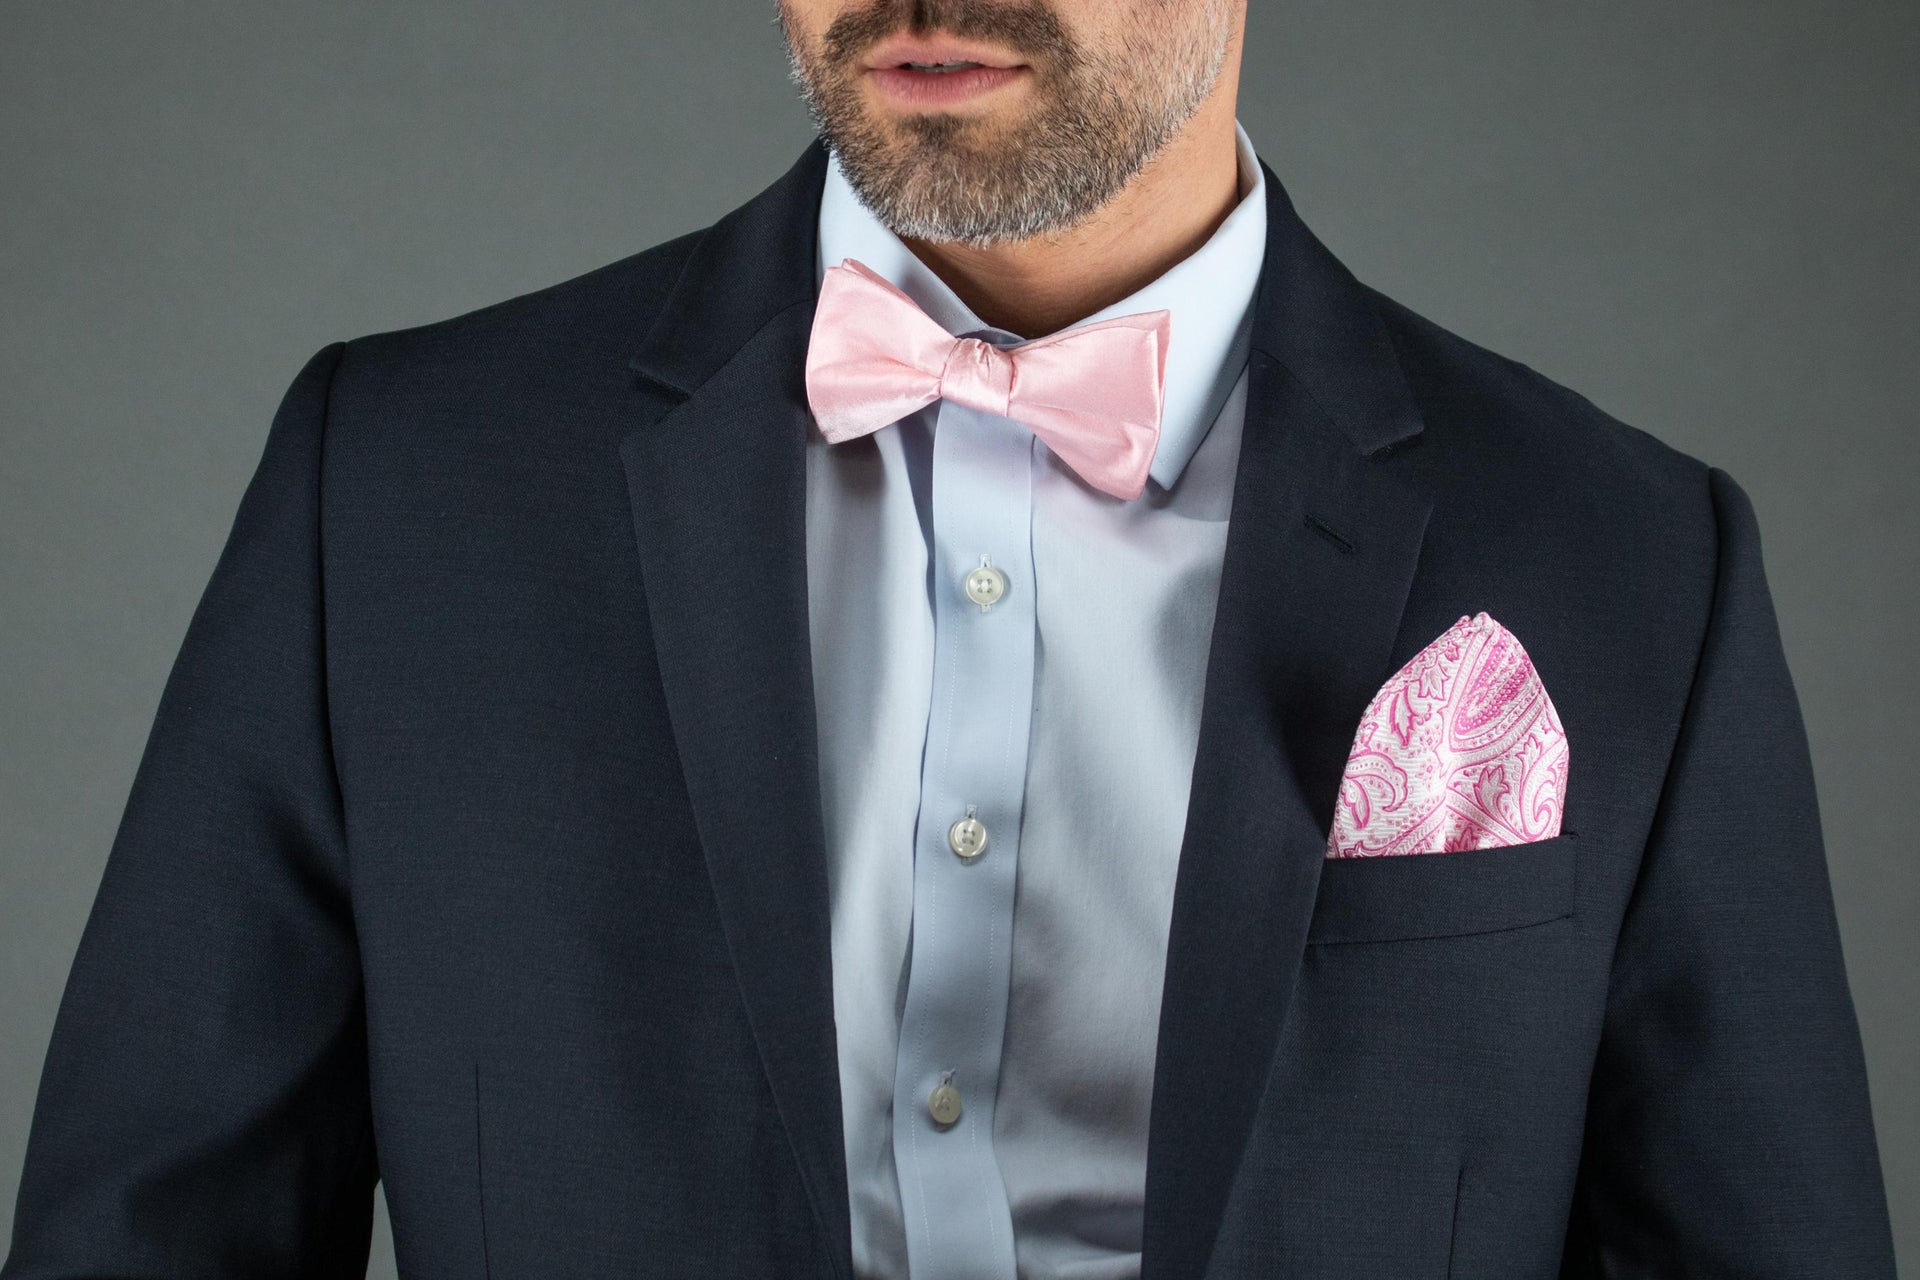 Man wearing pink bow tie and pocket square